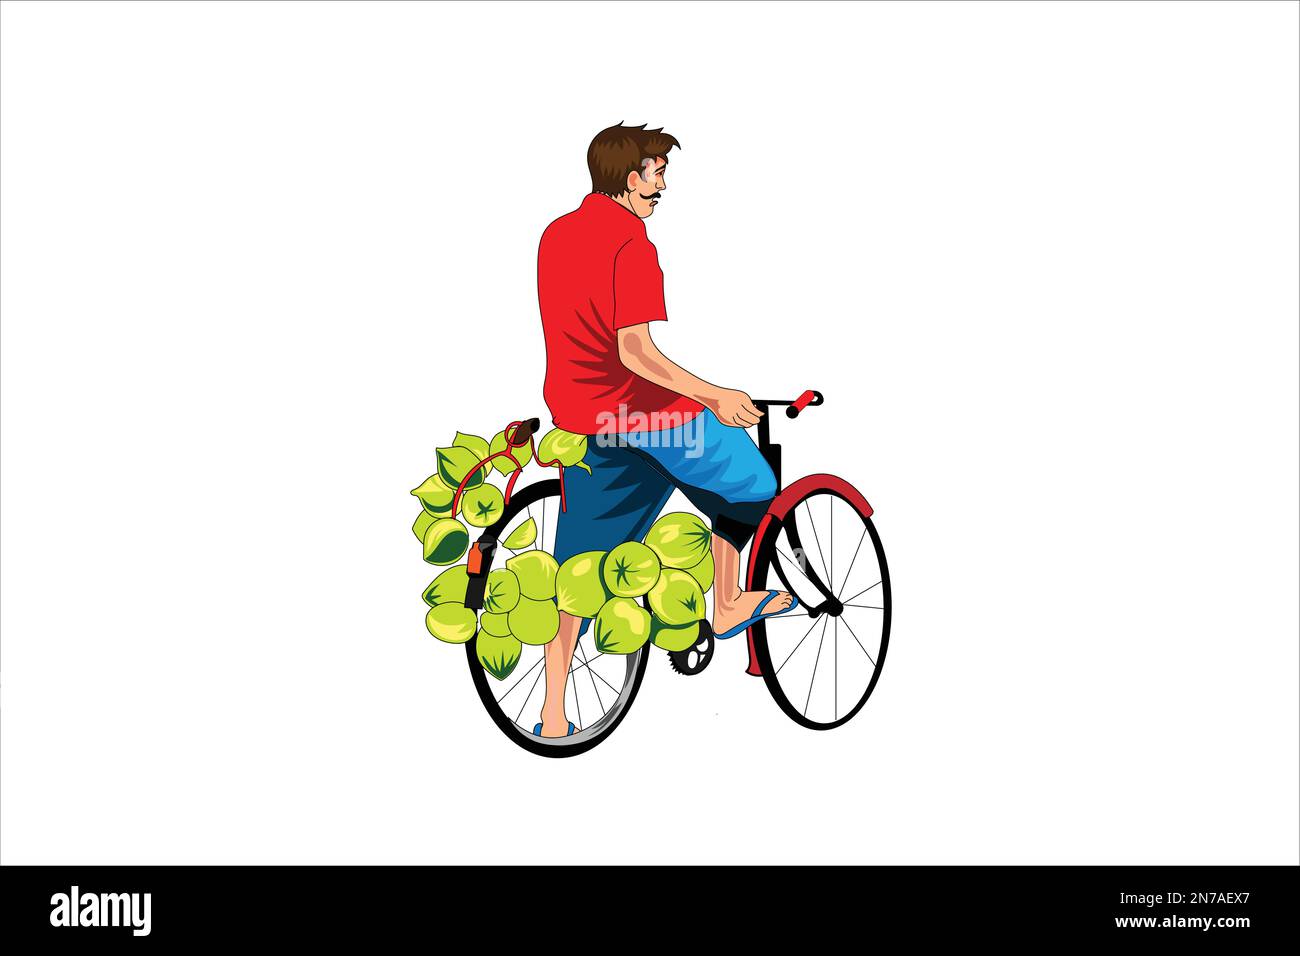 Man selling coconut on cycle vector Stock Vector